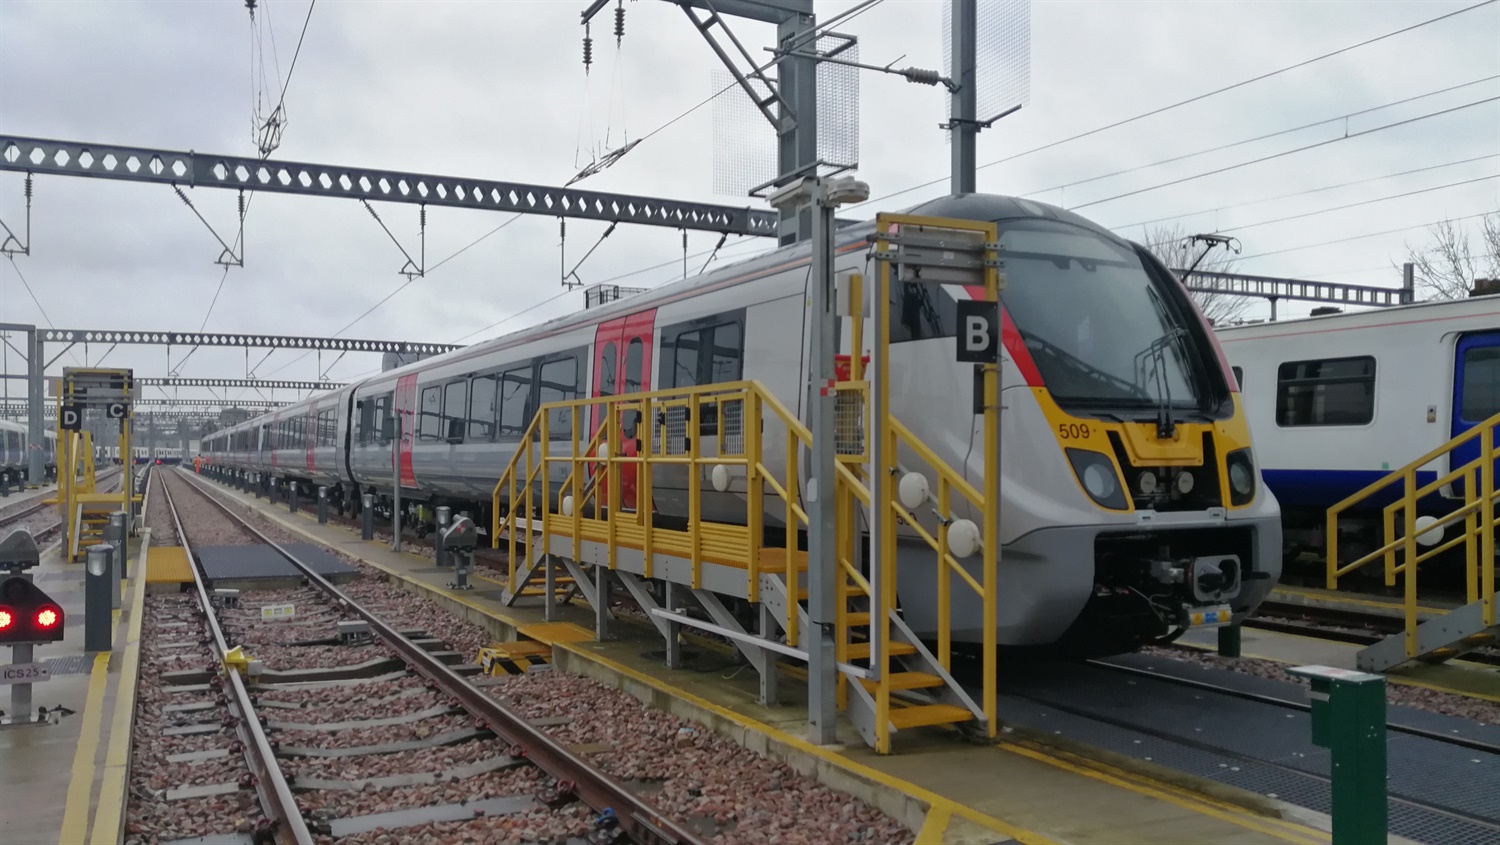 Greater Anglia’s new commuter trains have arrived in Essex 